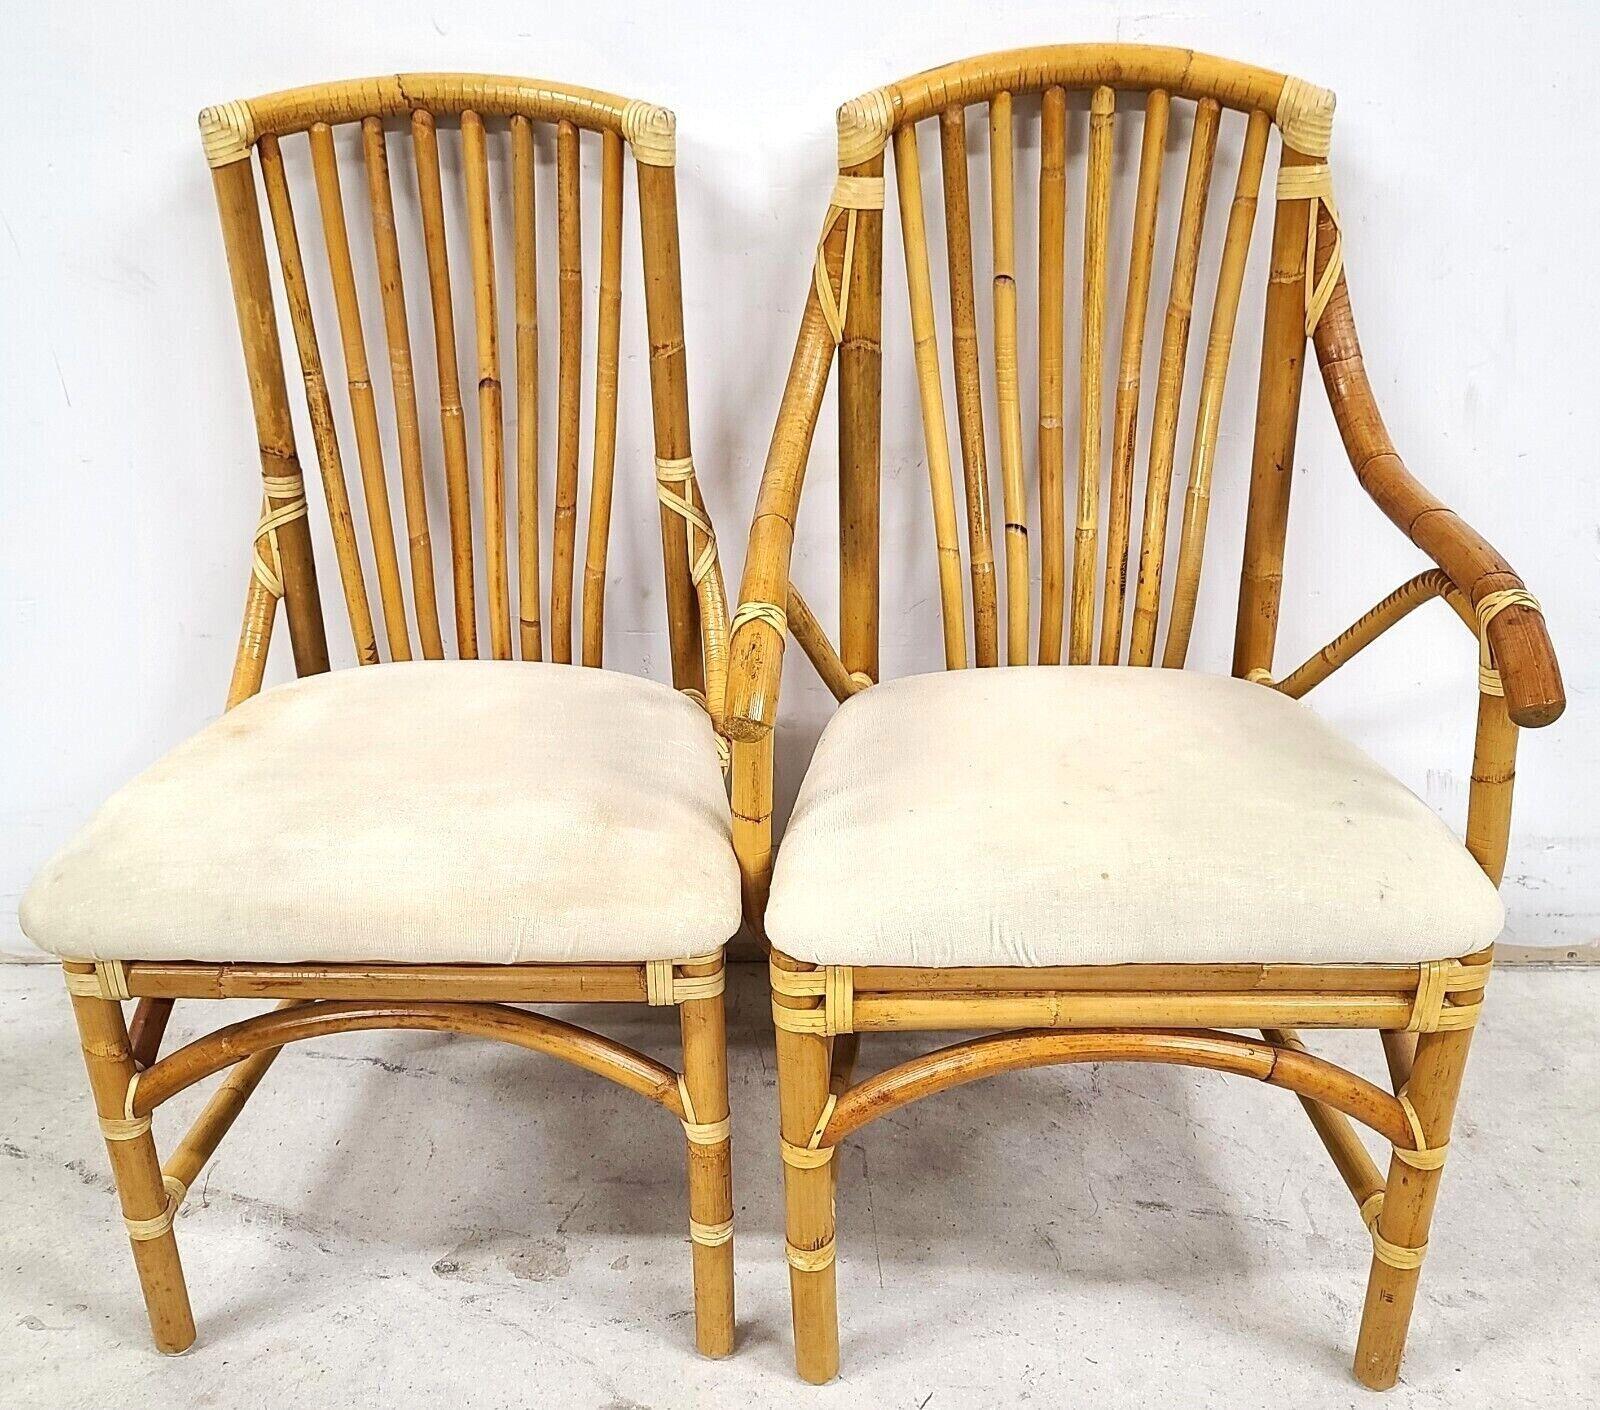 Vintage 1970s Bamboo Rattan Chairs, Set of 4 For Sale 1